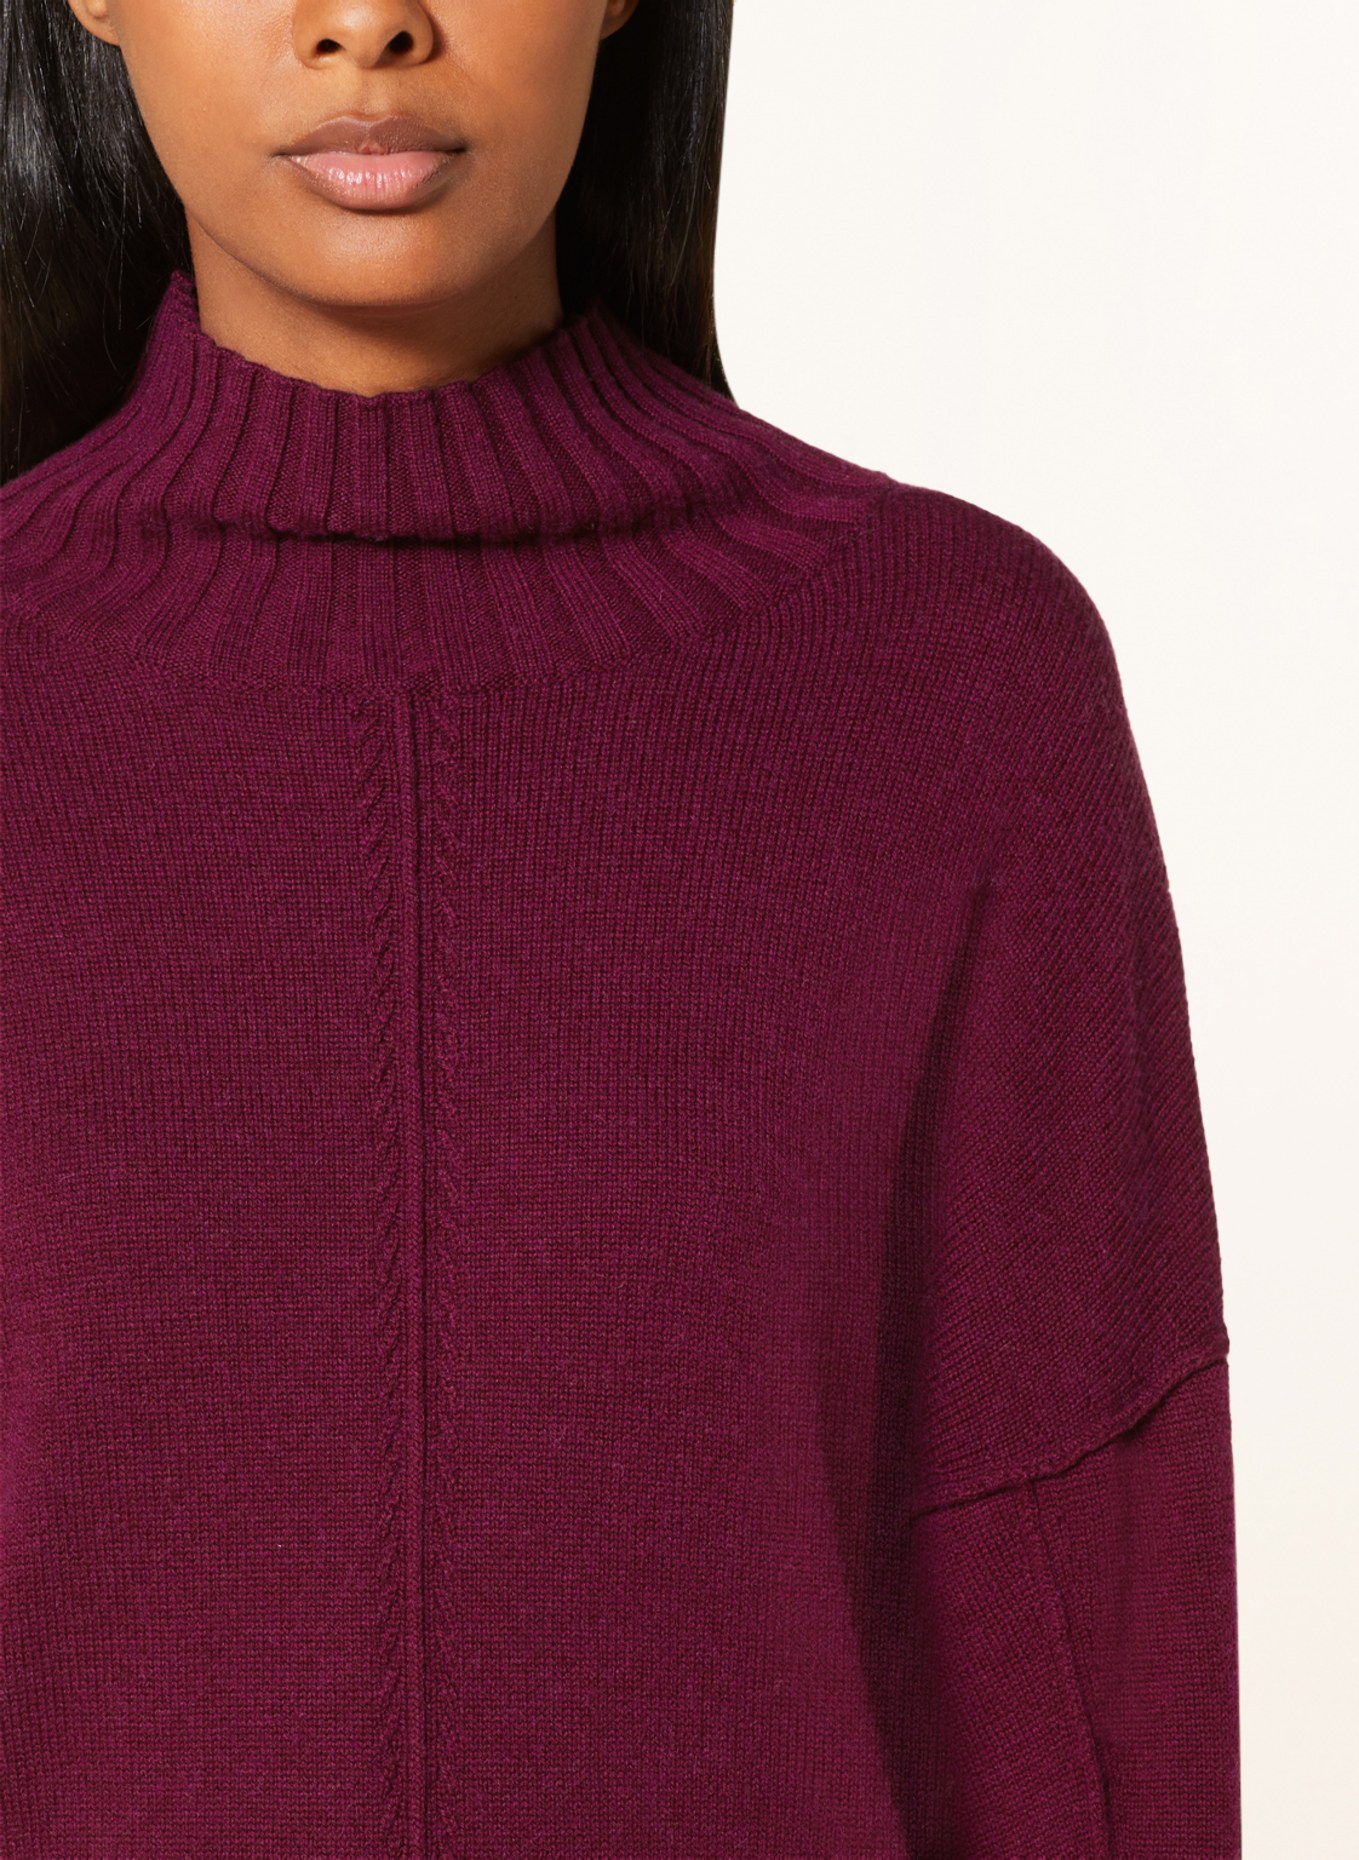 MRS & HUGS Sweater with cashmere, Color: DARK RED (Image 4)